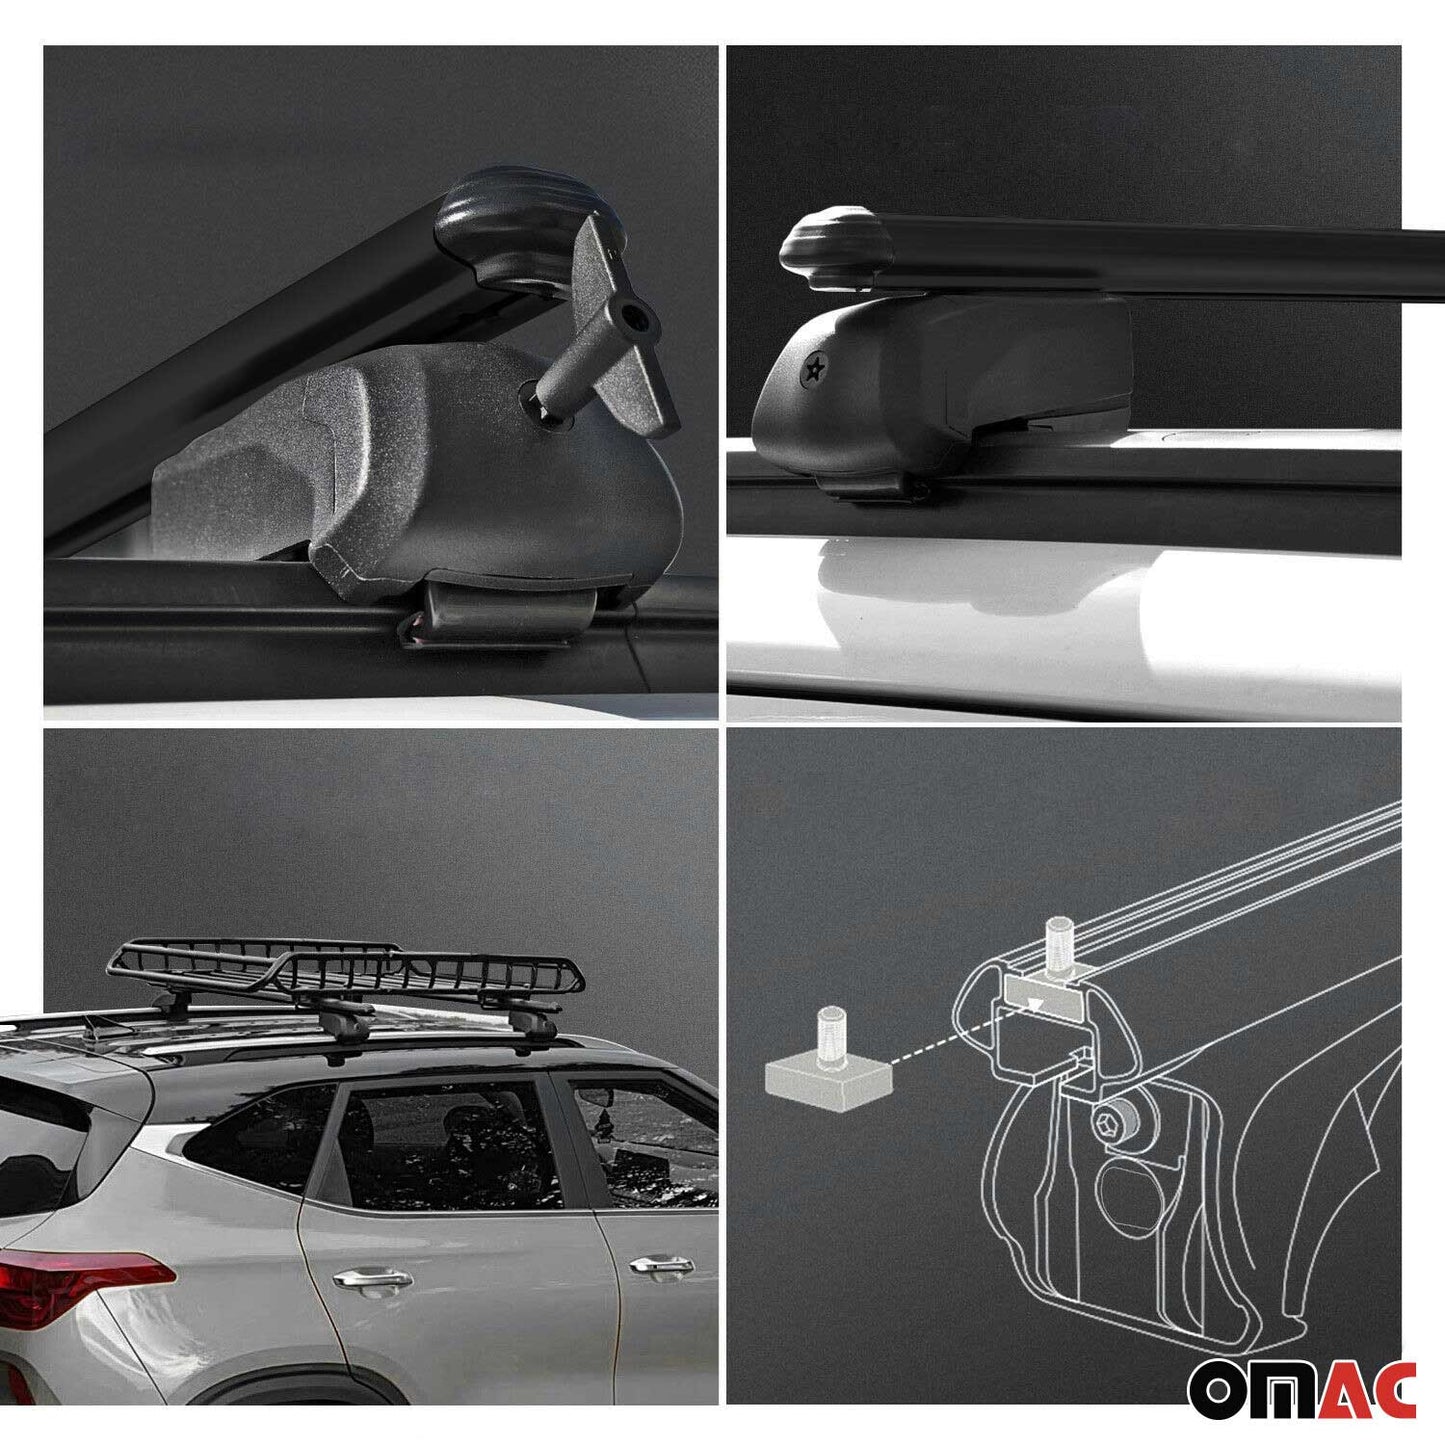 OMAC Lockable Roof Rack Cross Bars Luggage Carrier for Toyota bZ4X 2023-2024 Black G003020